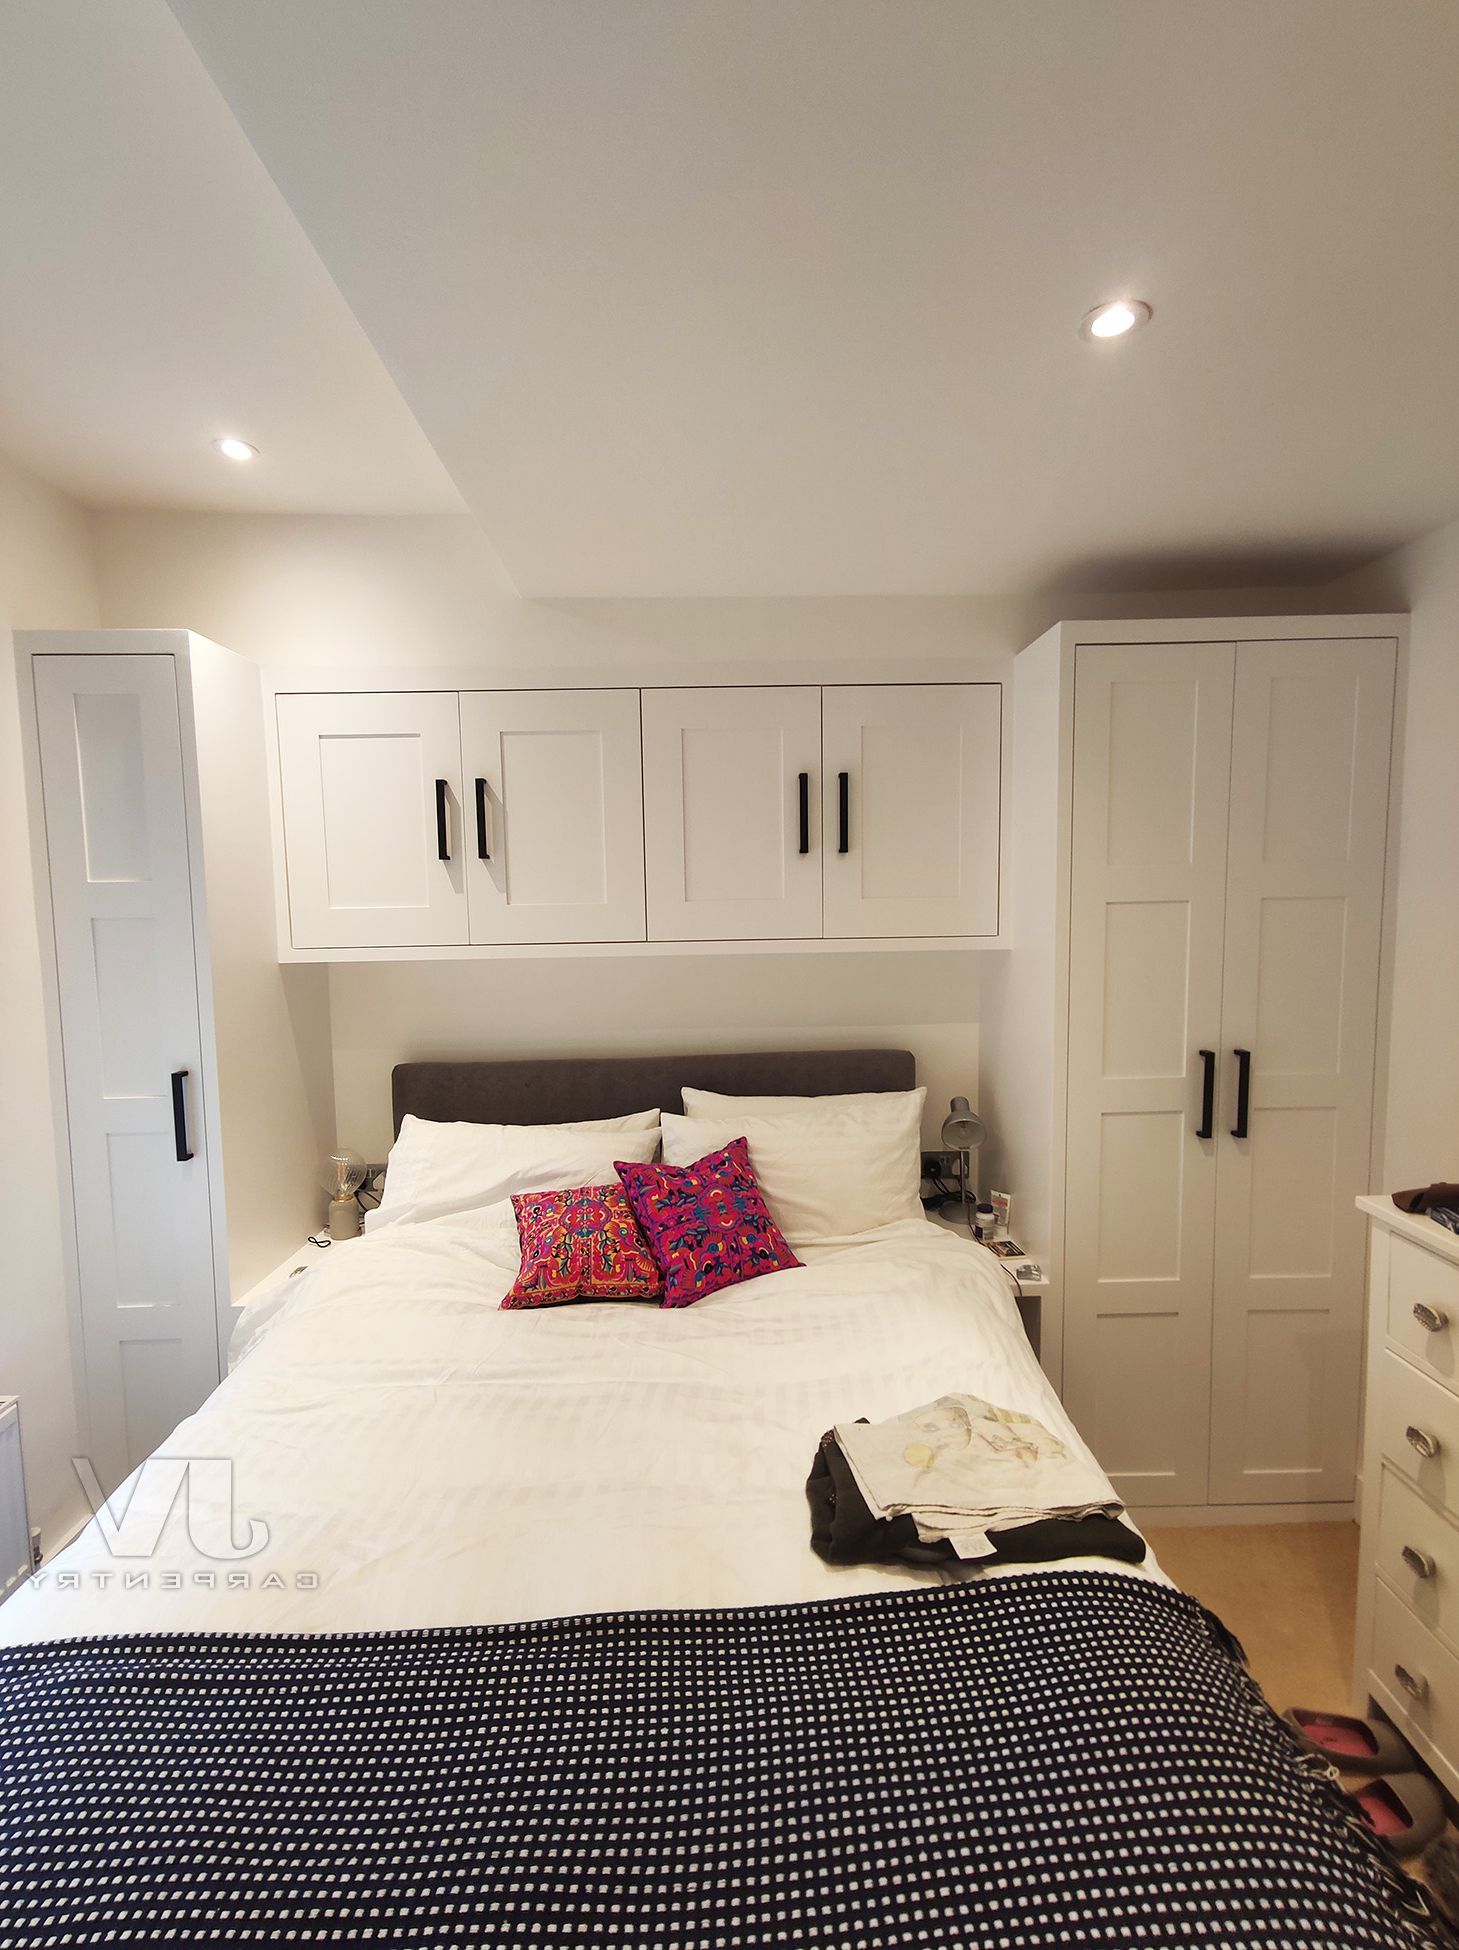 12 Fitted Wardrobes Over Bed Ideas For Your Bedroom | Jv Carpentry Within Over Bed Wardrobes Sets (View 9 of 20)